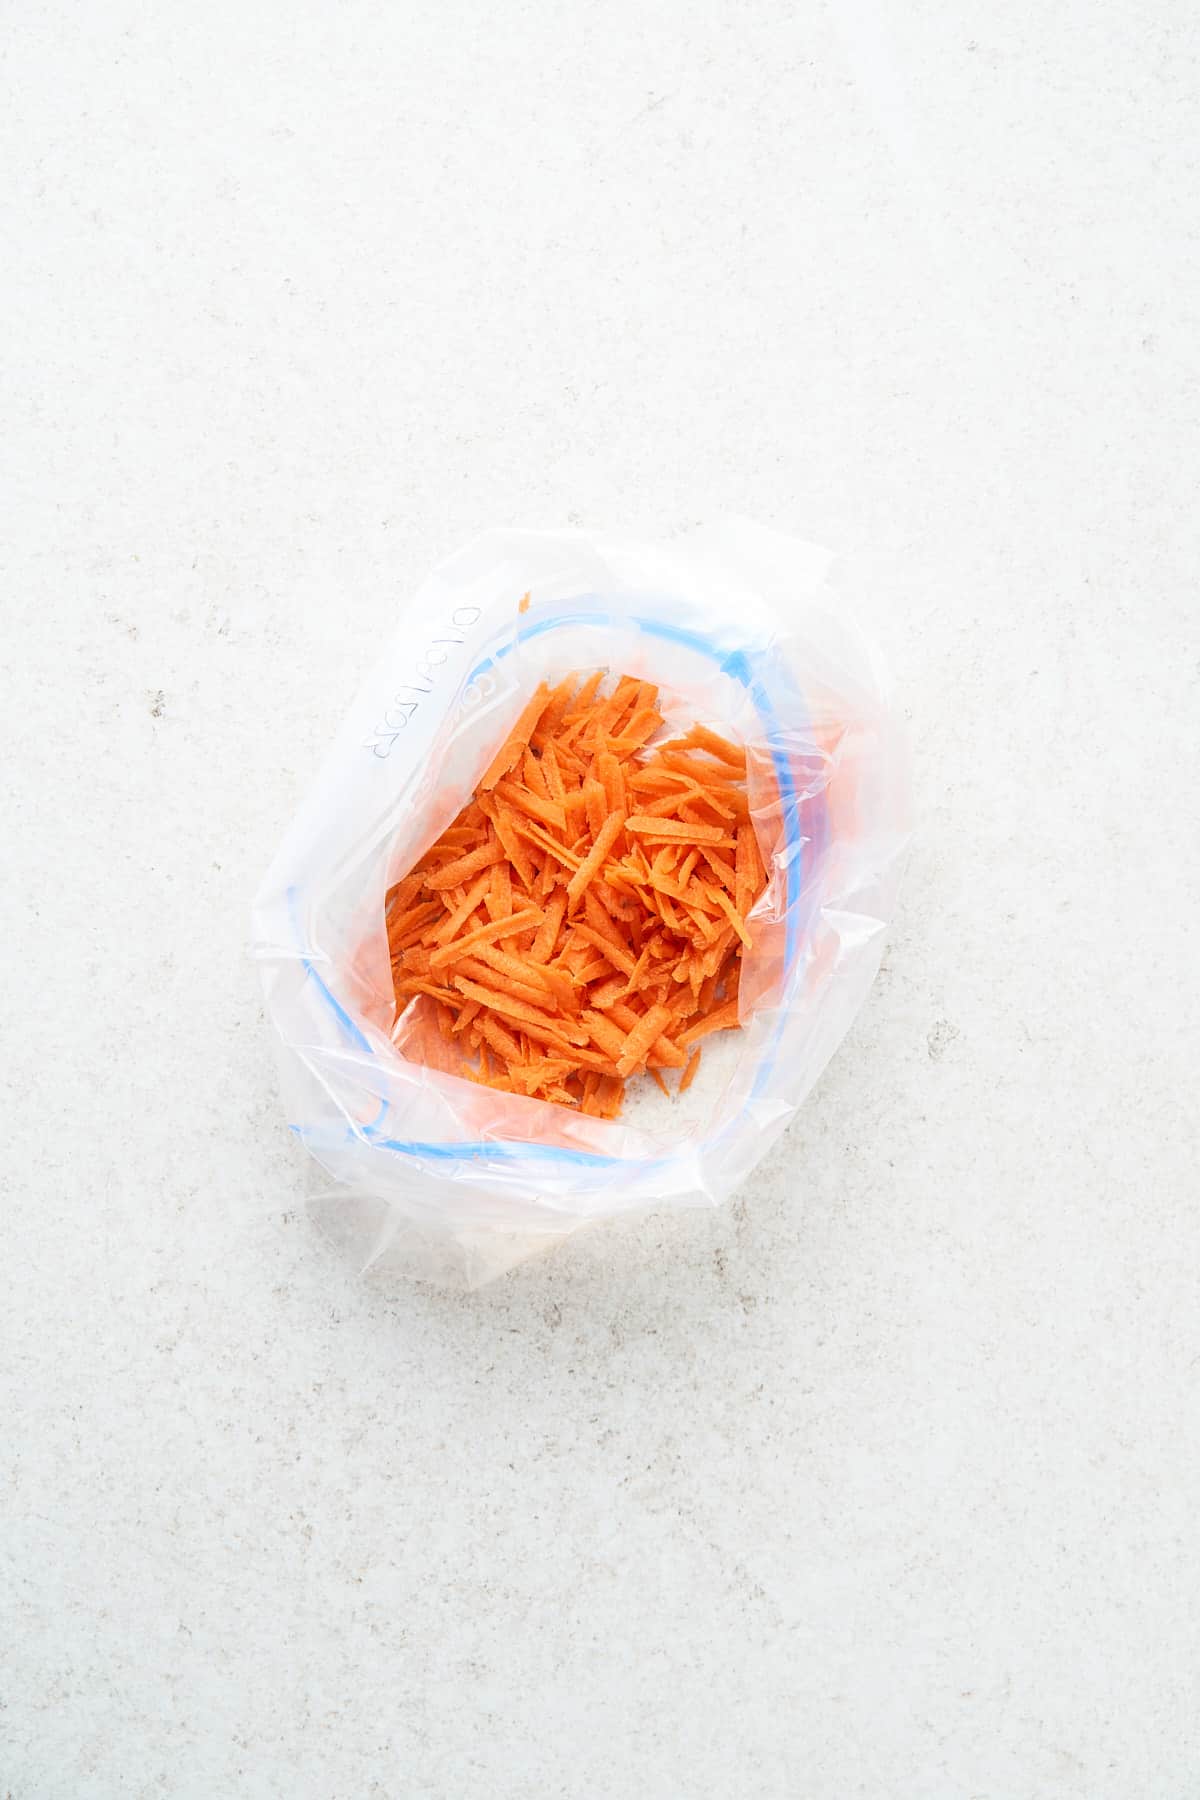 Grated carrots in a freezer bag.